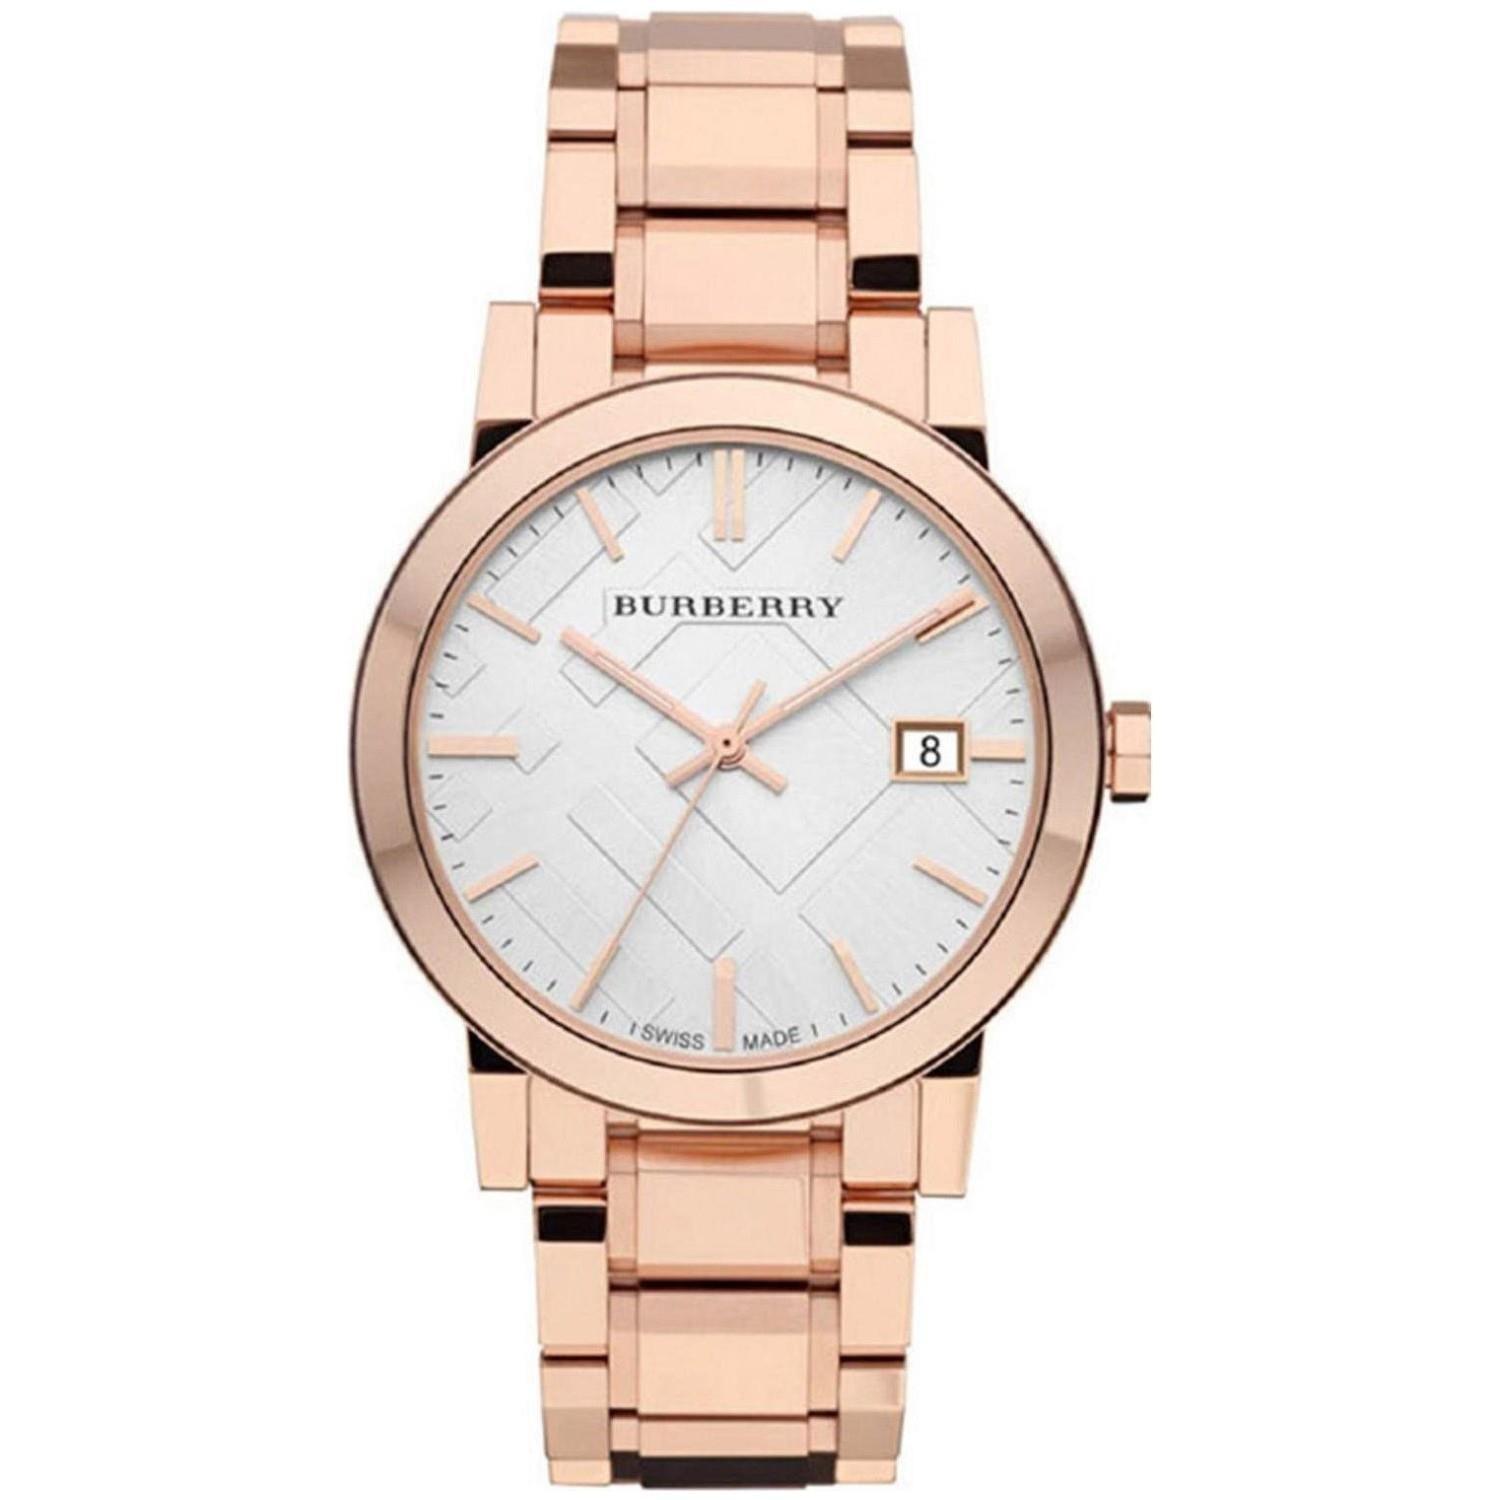 Burberry Women's Watches - Watch Home™